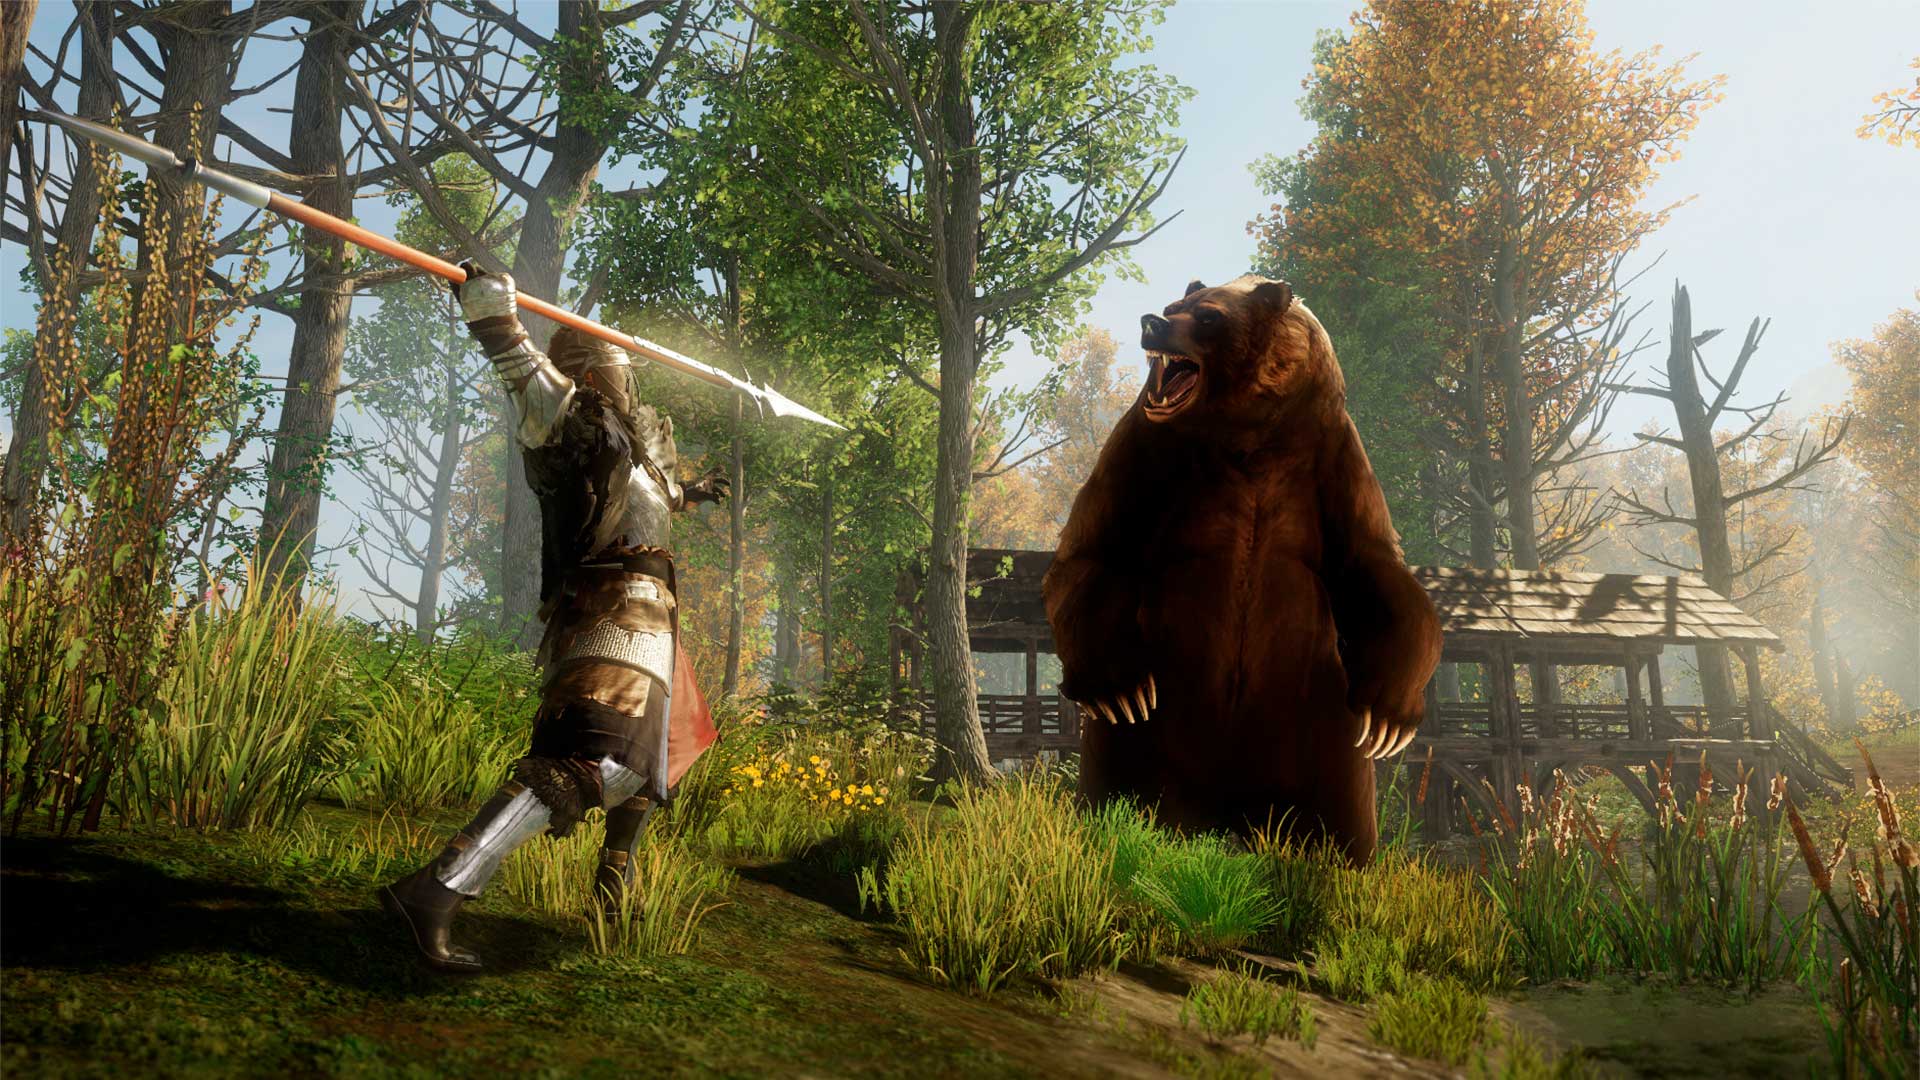 A speared explorer attacks a bear in the woods outside of a fort